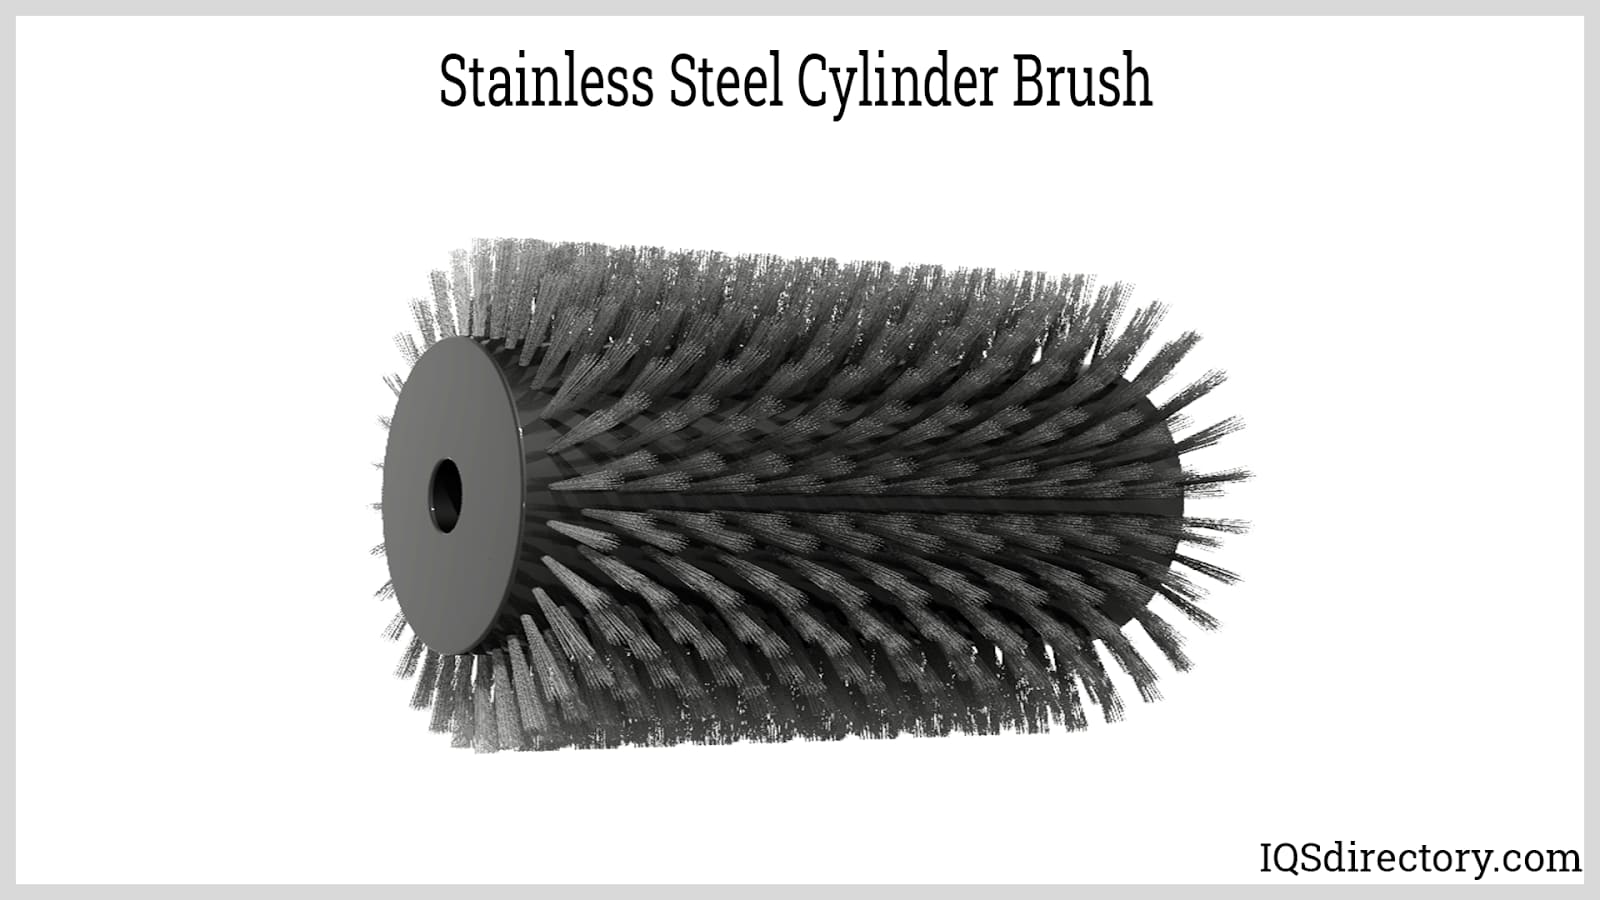 Stainless Steel Cylinder Brush